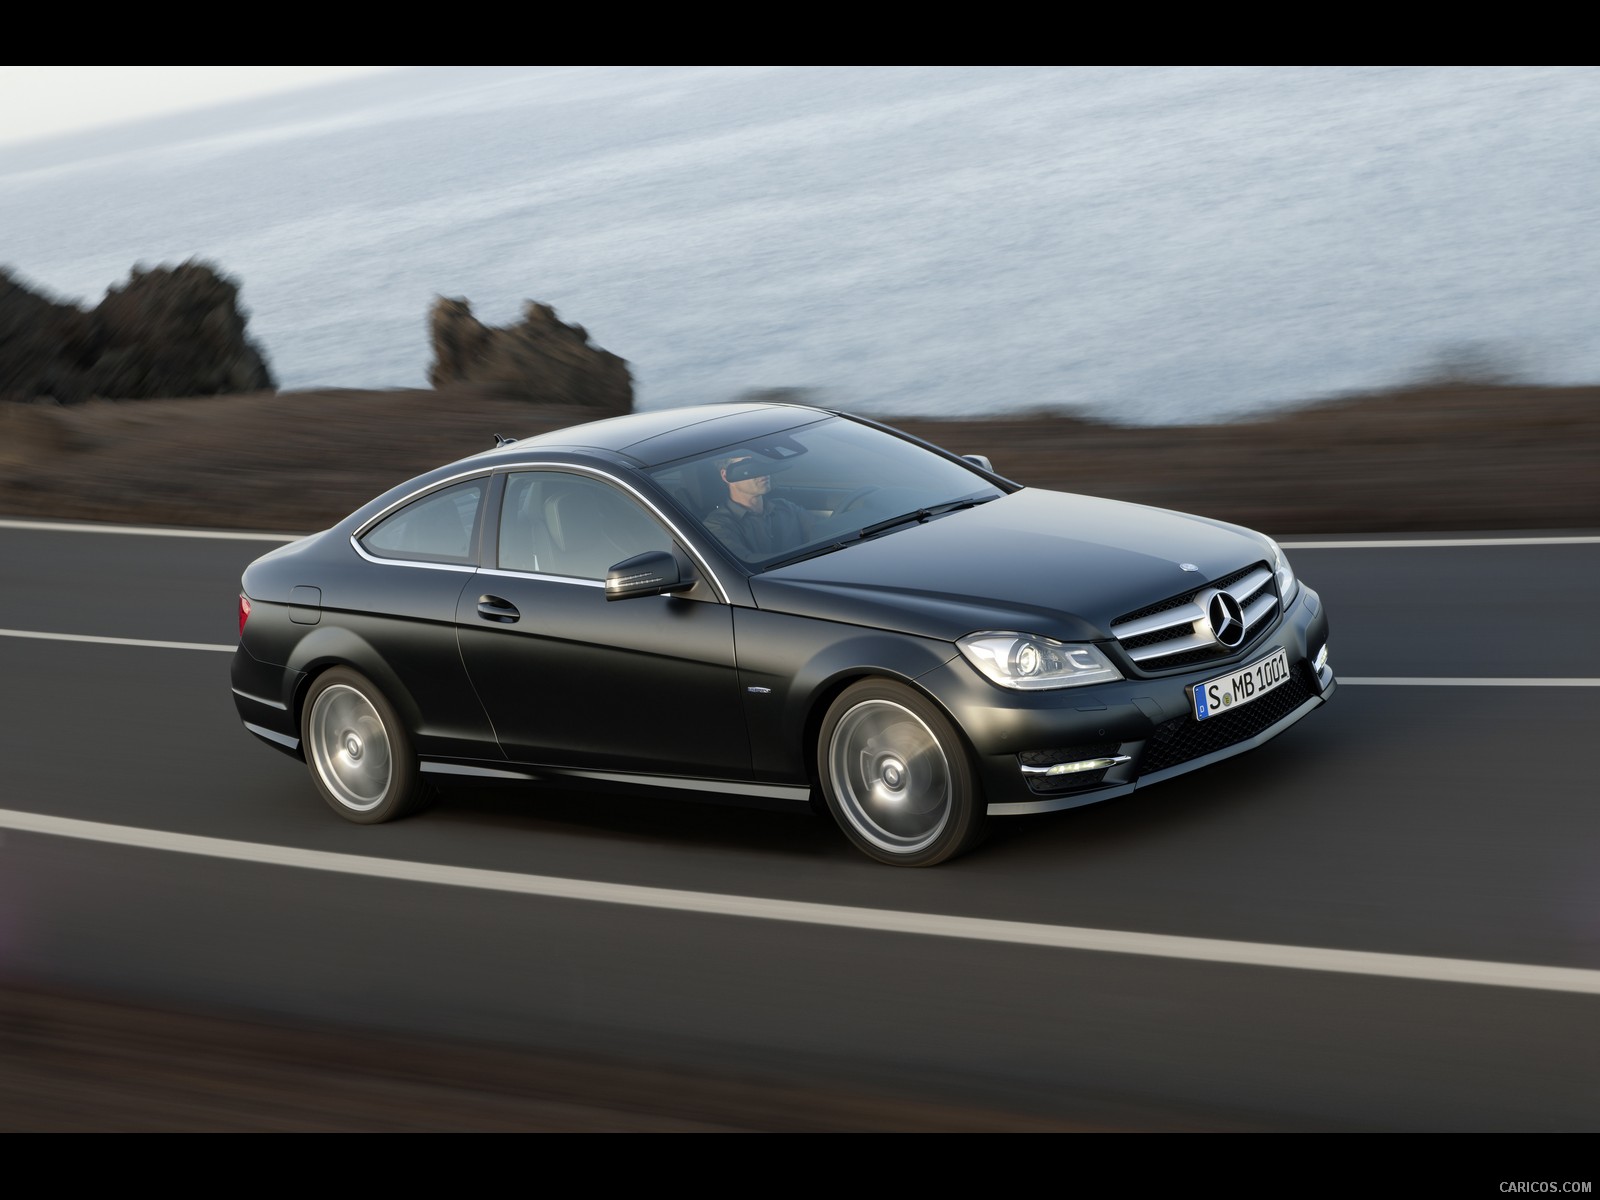 Mercedes-Benz C-Class Coupe (2012)  - Front , #3 of 79